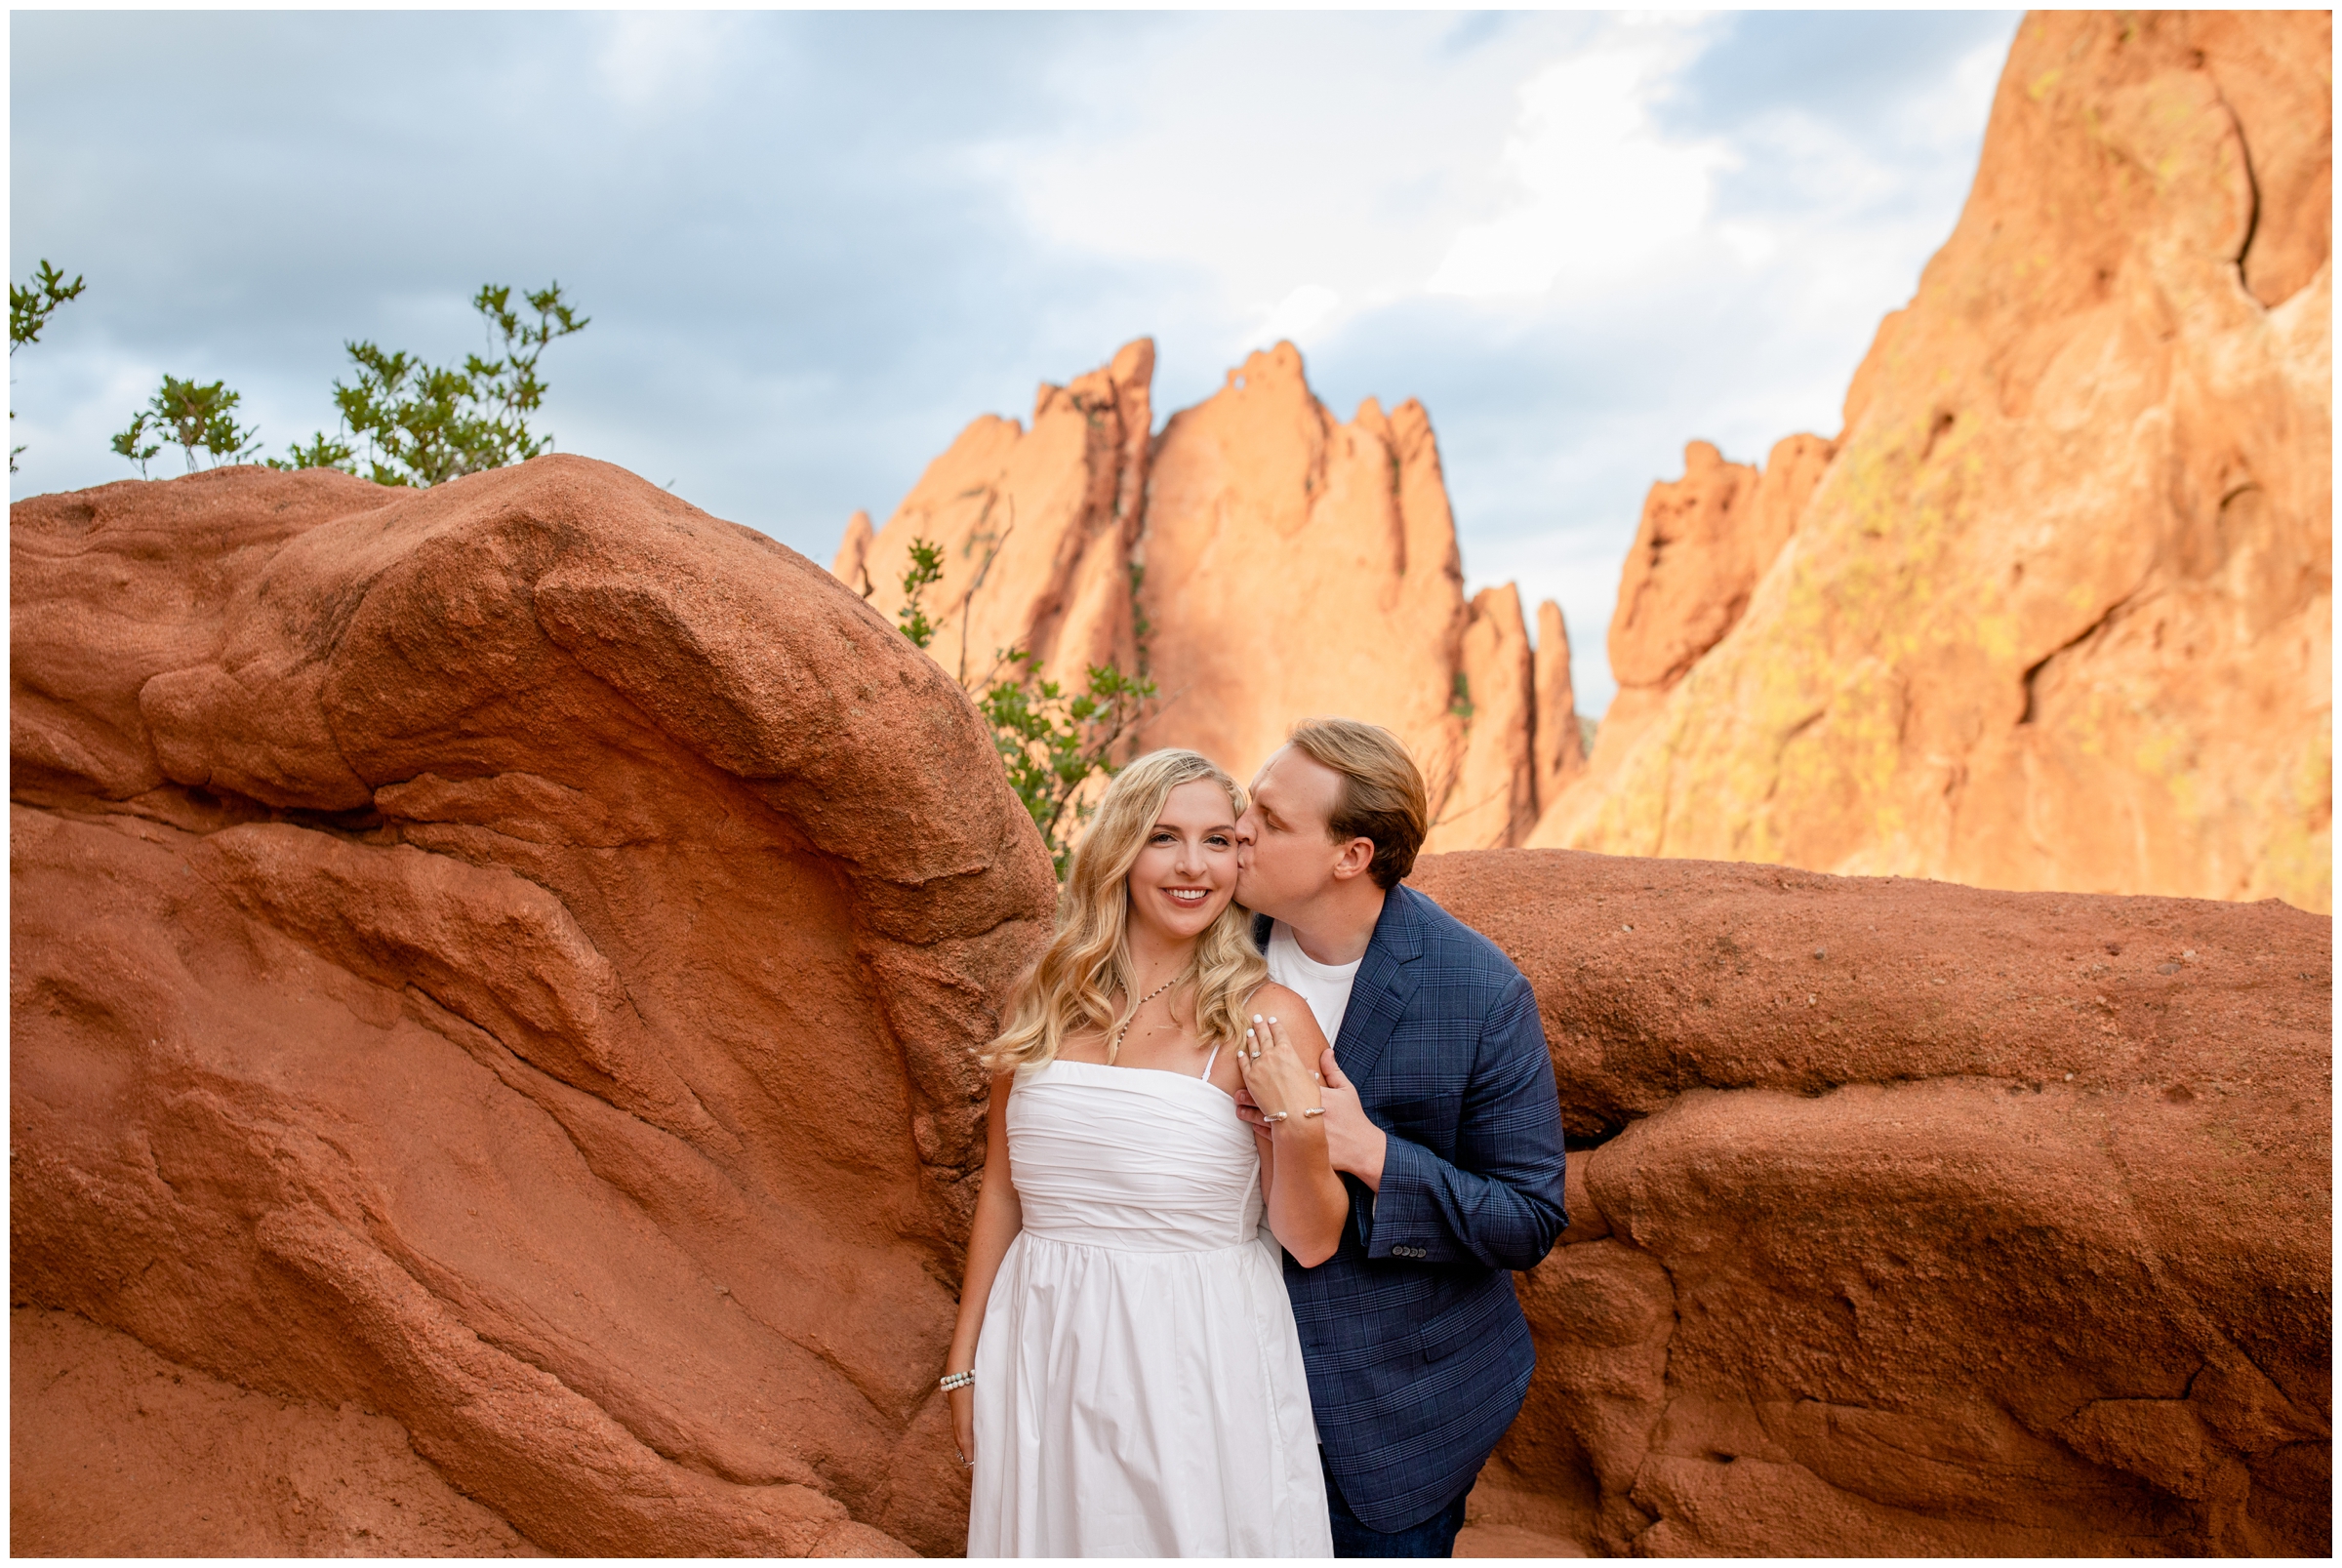 couple embracing with red rock formations in background during Colorado Springs engagement pictures at Garden of the Gods